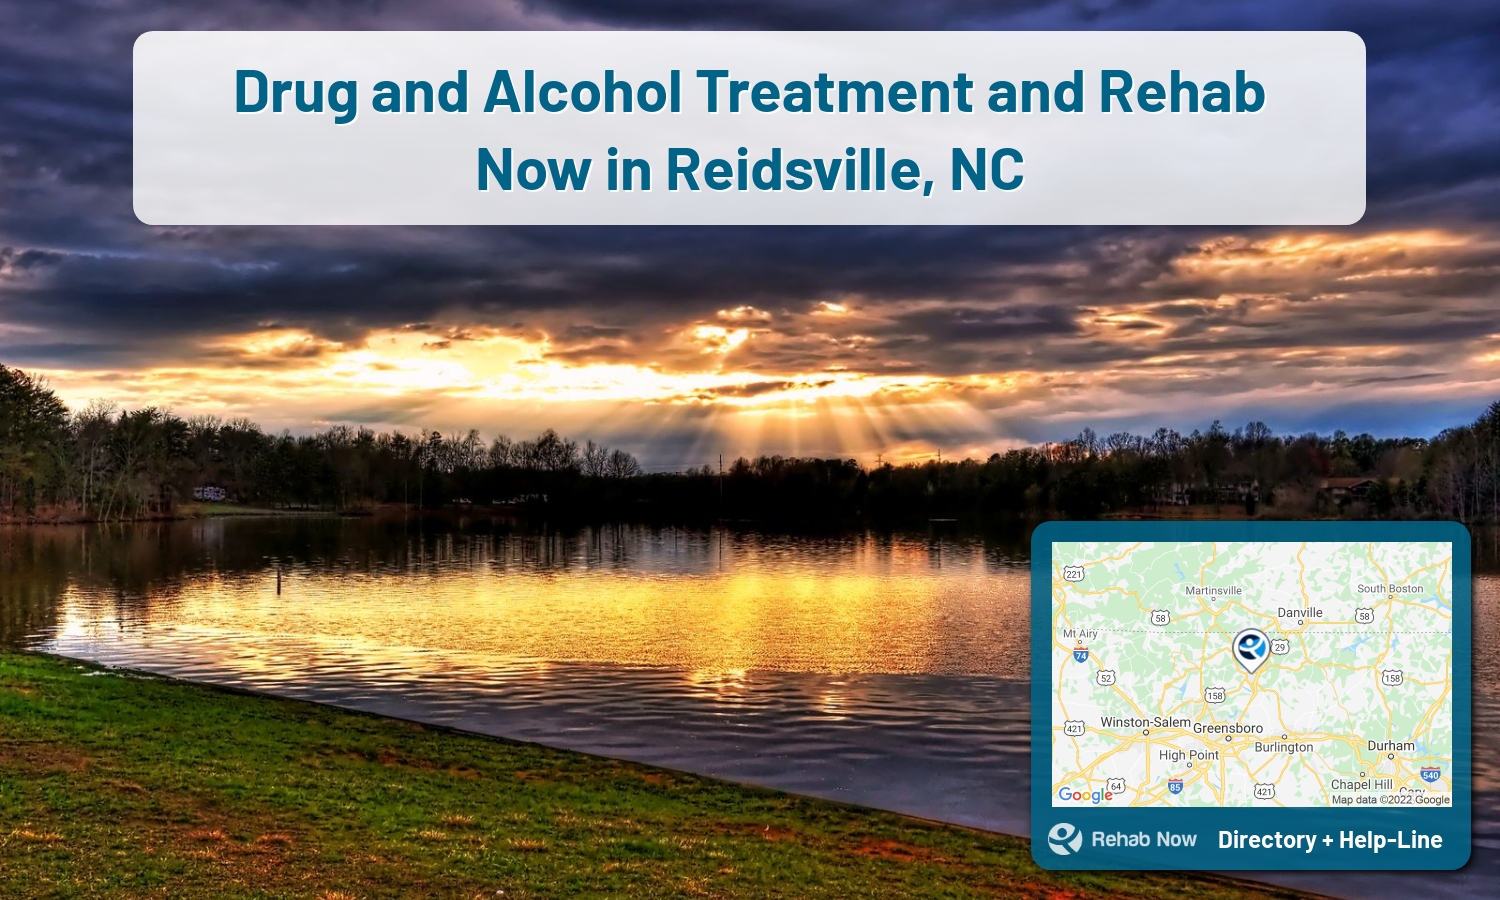 View options, availability, treatment methods, and more, for drug rehab and alcohol treatment in Reidsville, North Carolina